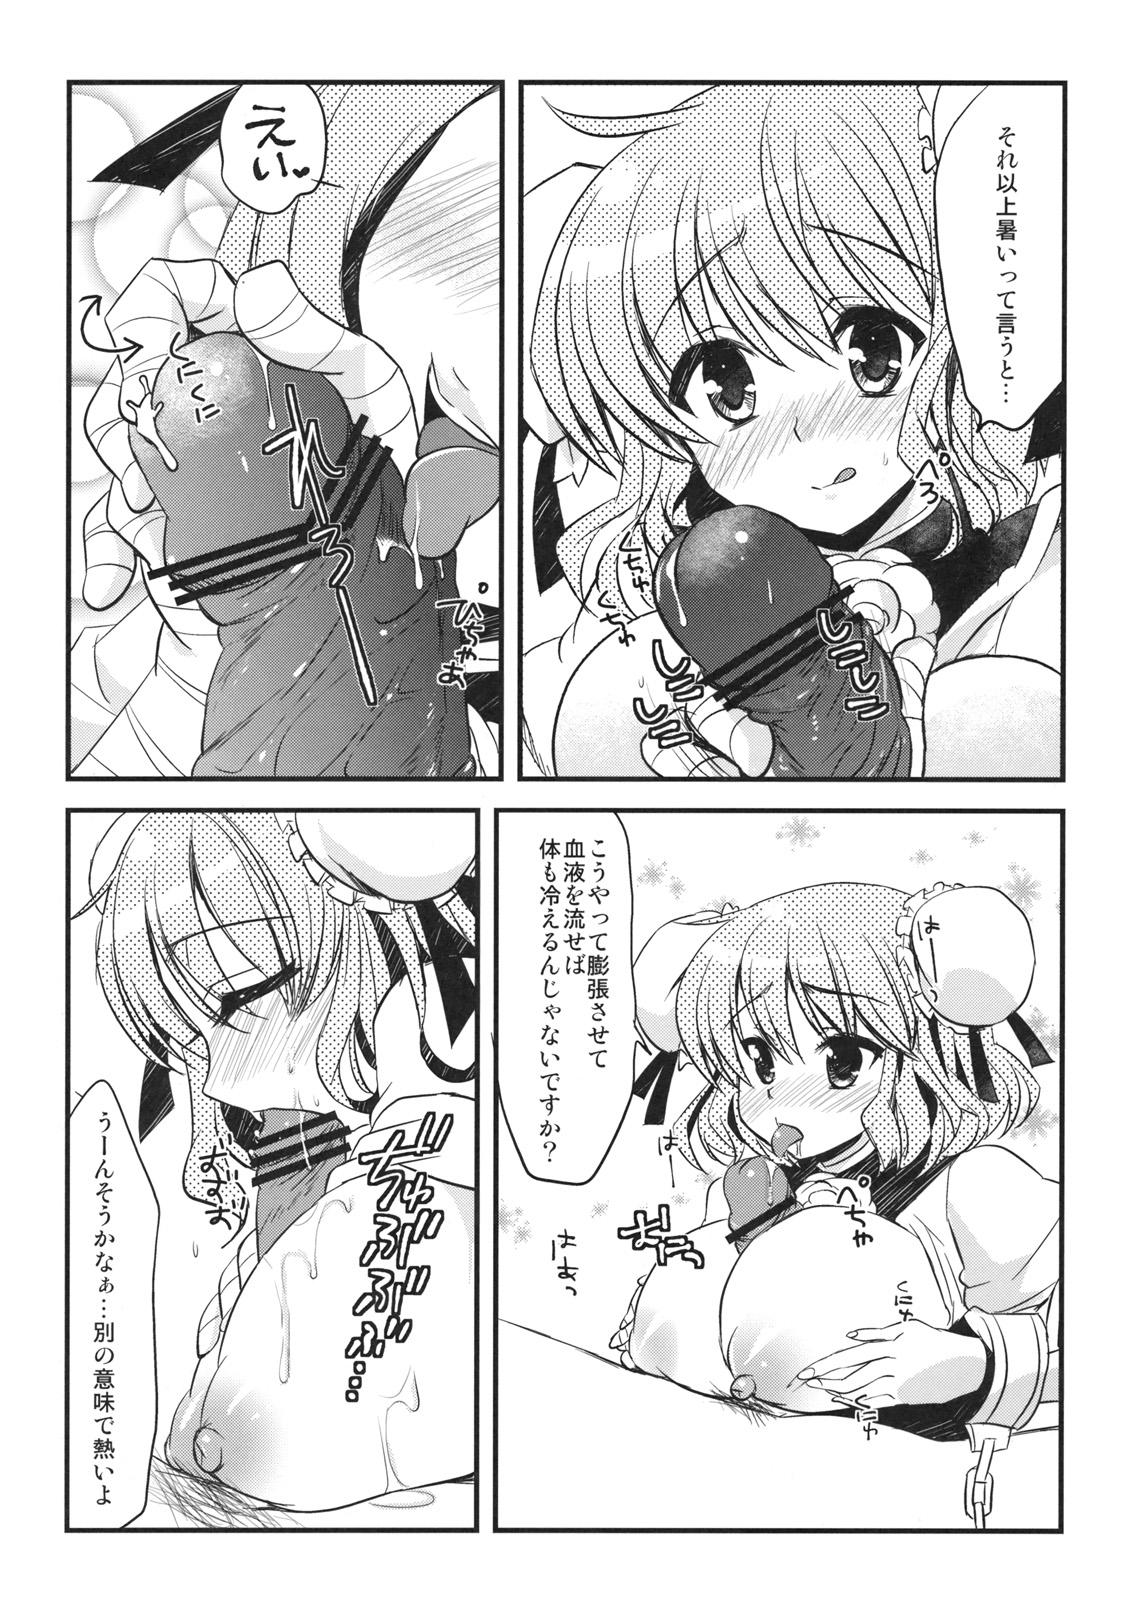 Sharing Kasenppai! - Touhou project Matures - Page 7